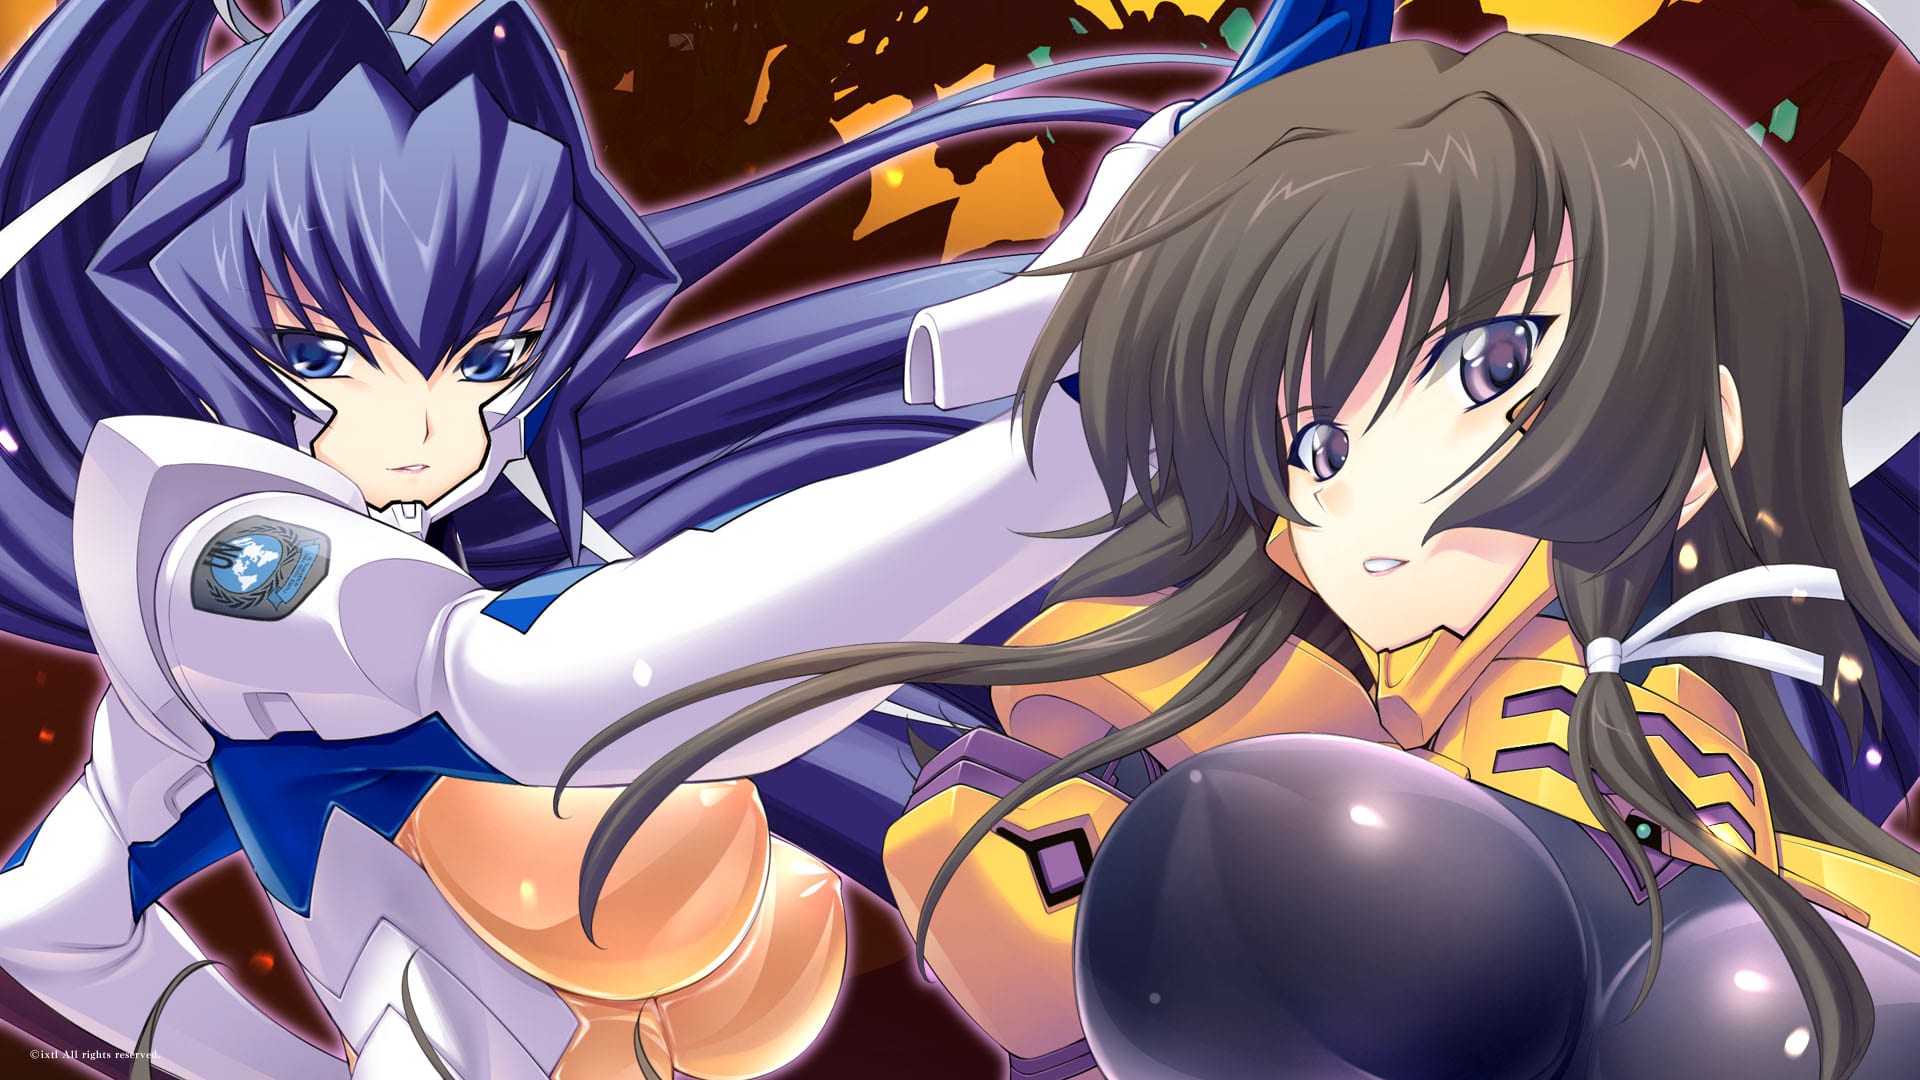 What Is Muv-Luv? Here’s Why You Should Care About One of the Best Visual Novel Series Ever